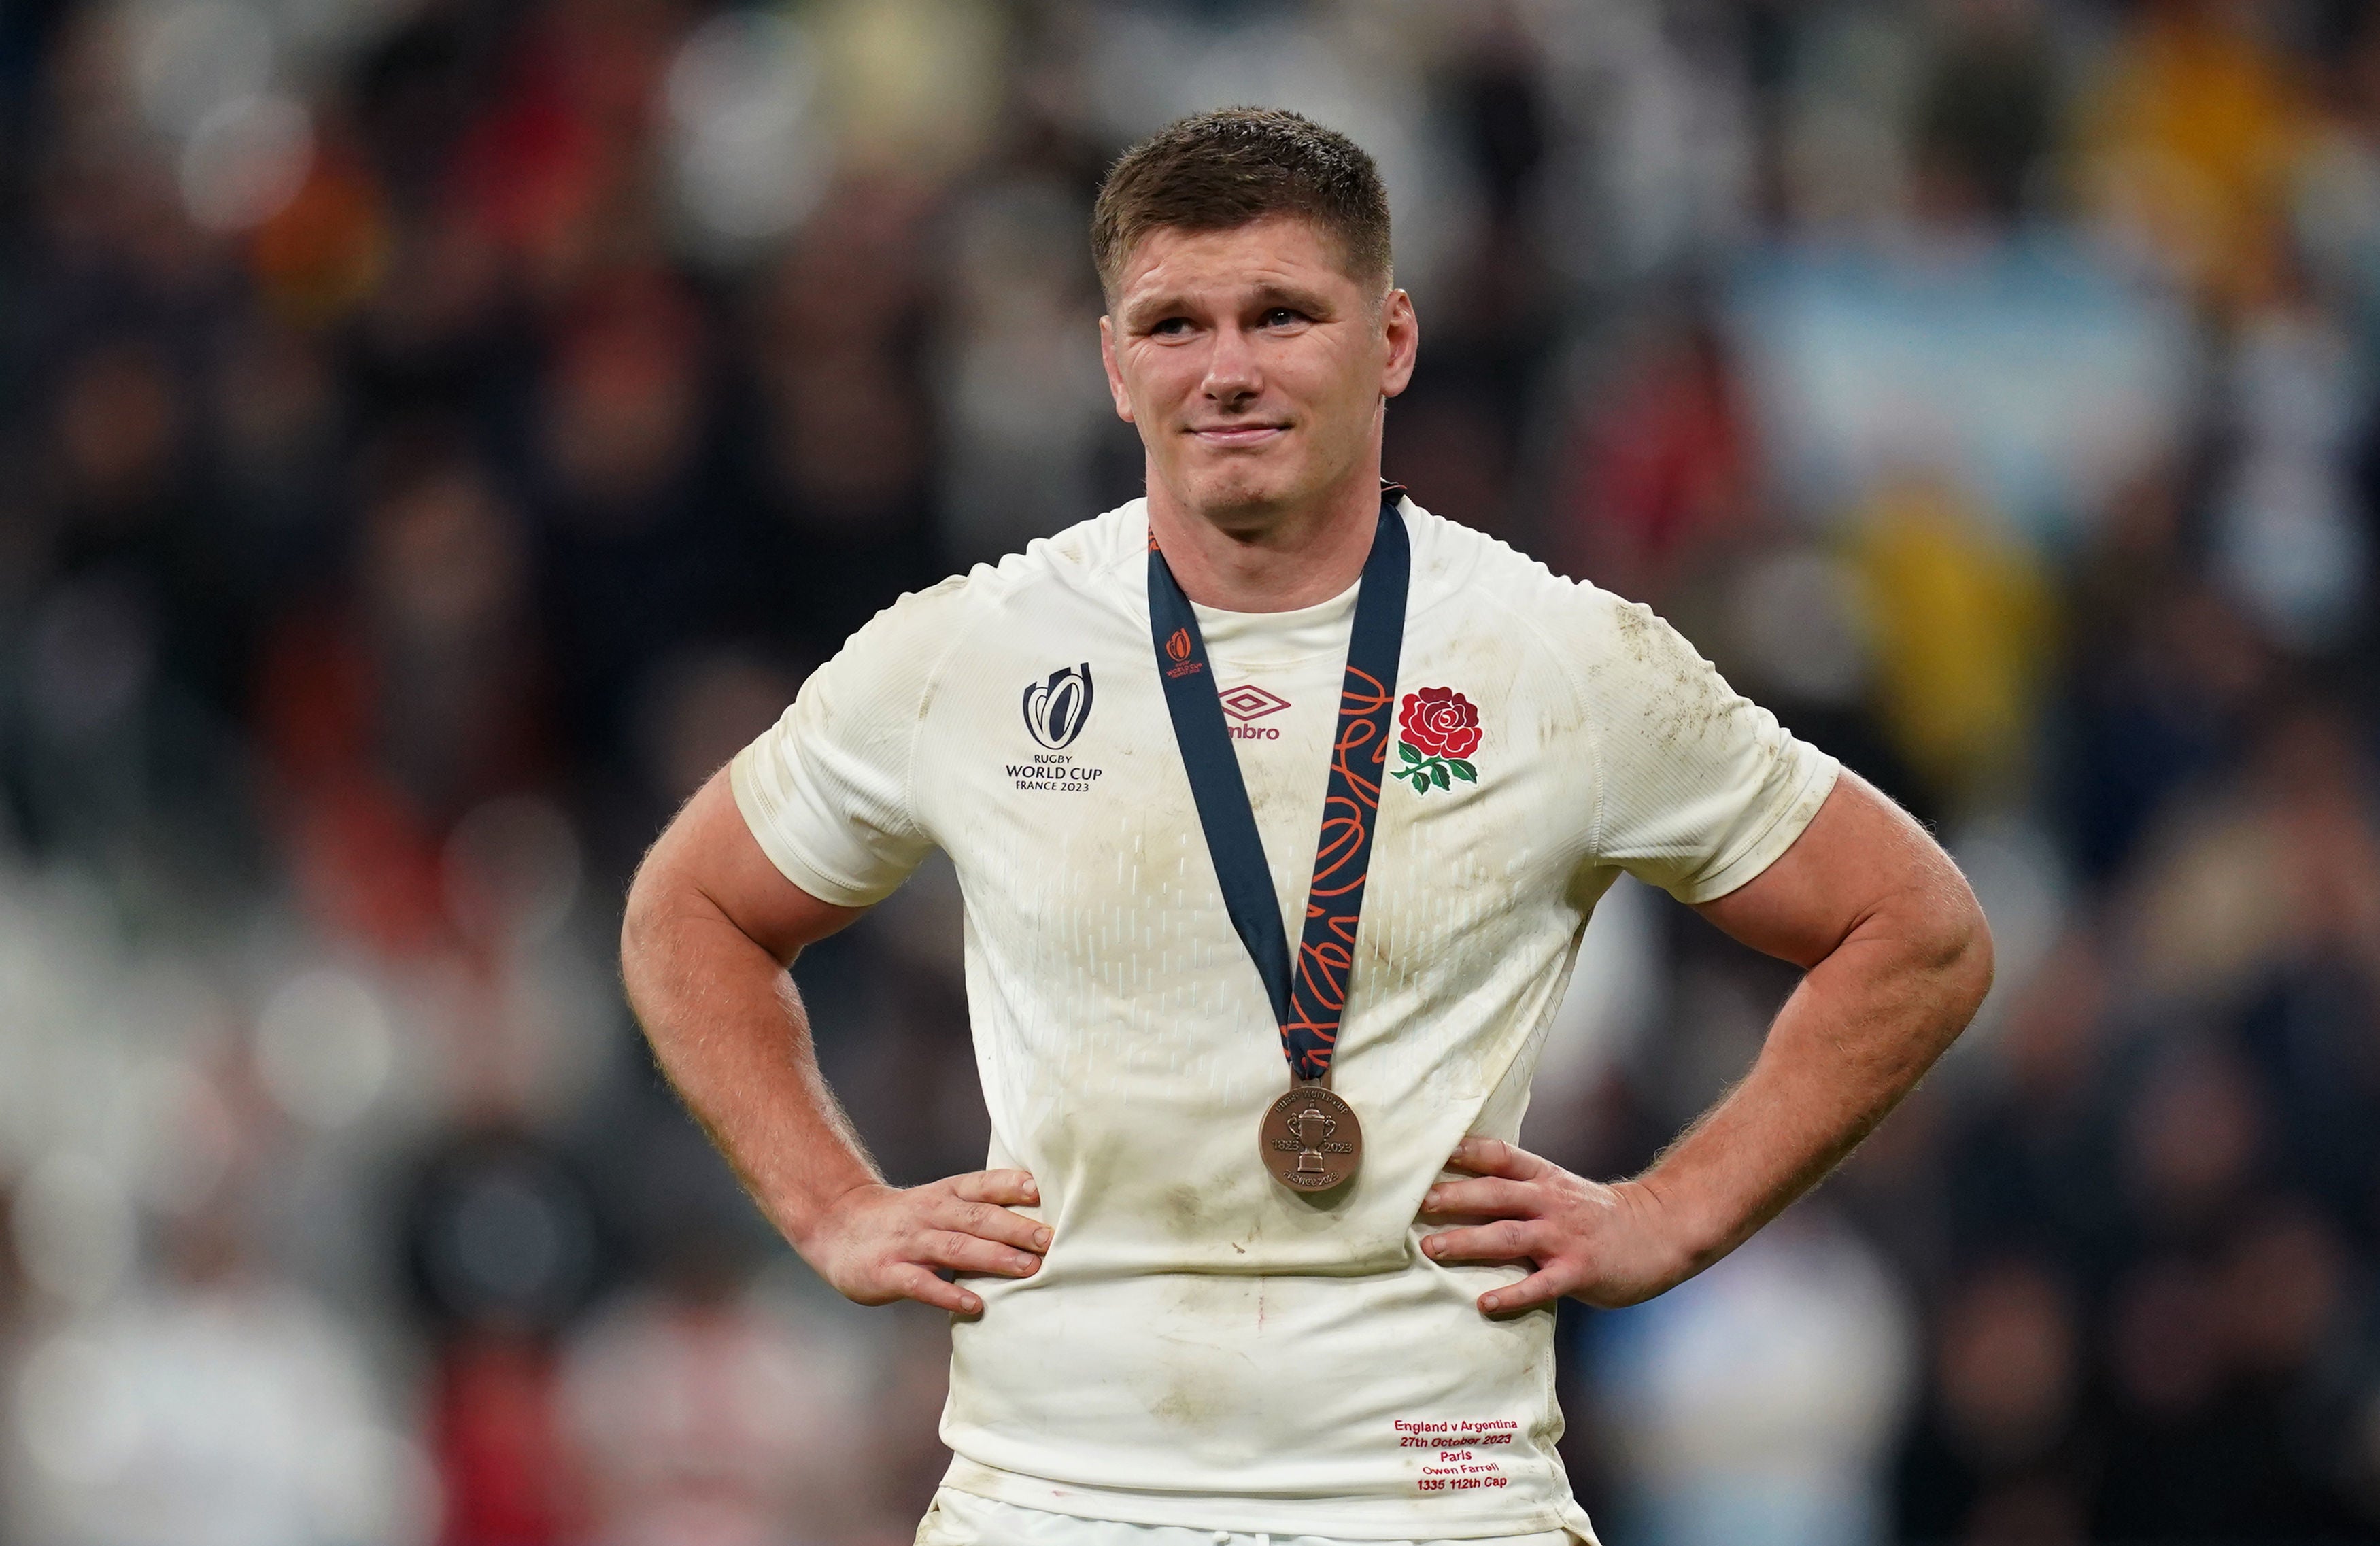 Owen Farrell shone for England at the Rugby World Cup in France